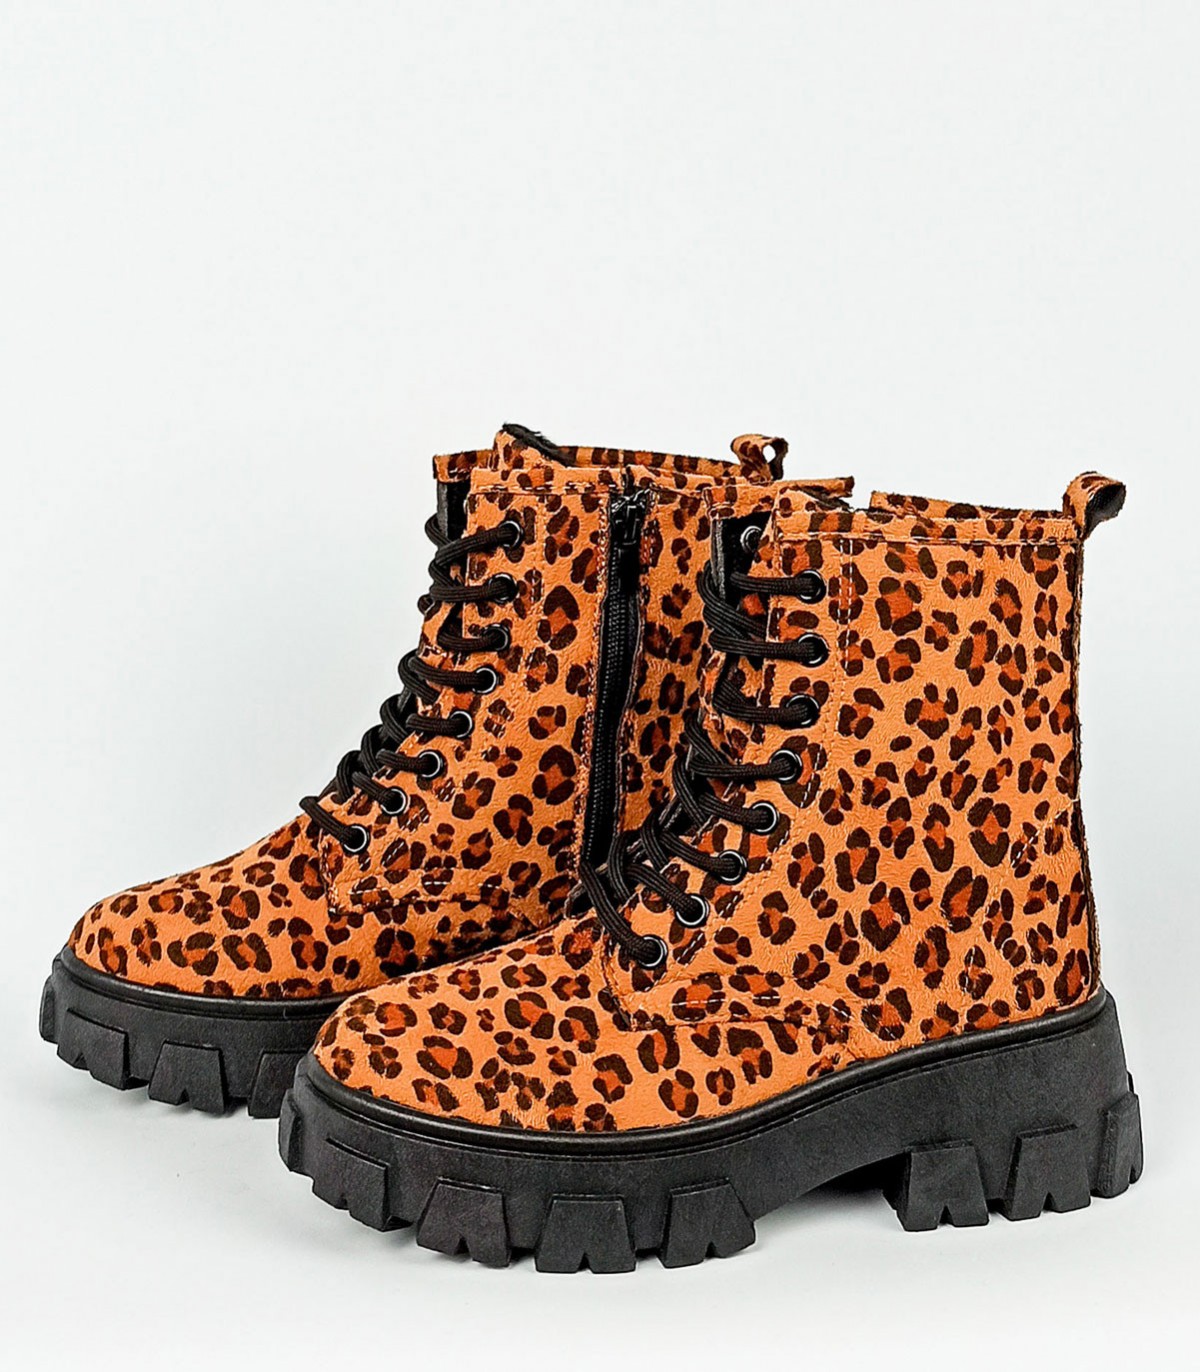 PRINTED BOOTS